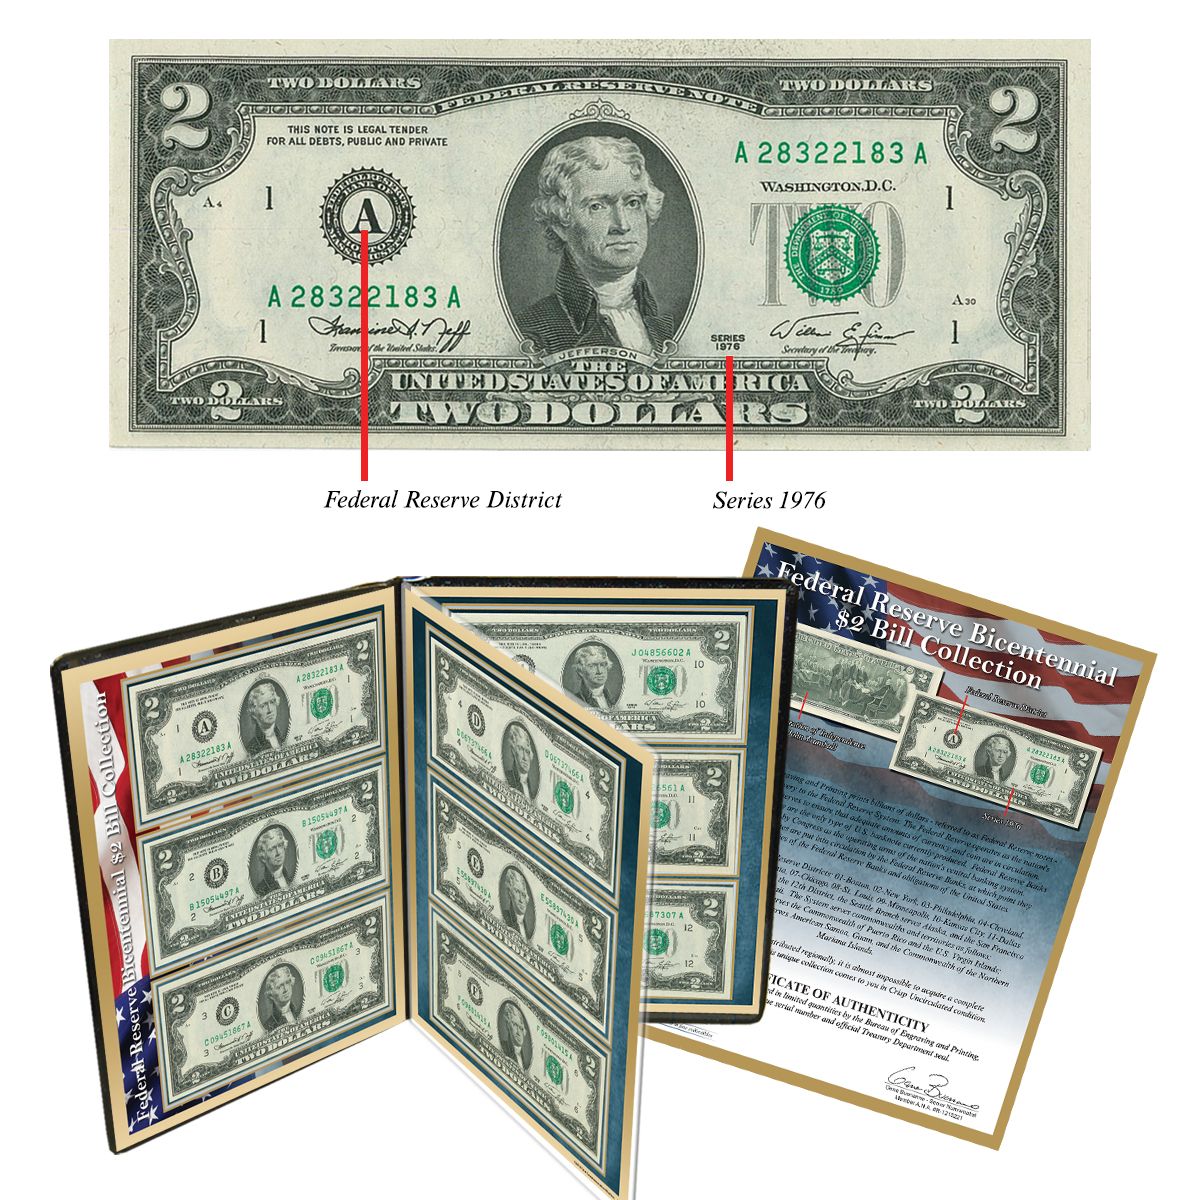 Lot 5 Consecutive Serial #'s * 1976 BICENTENNIAL Colorized 2-SIDED US $2 Bills 